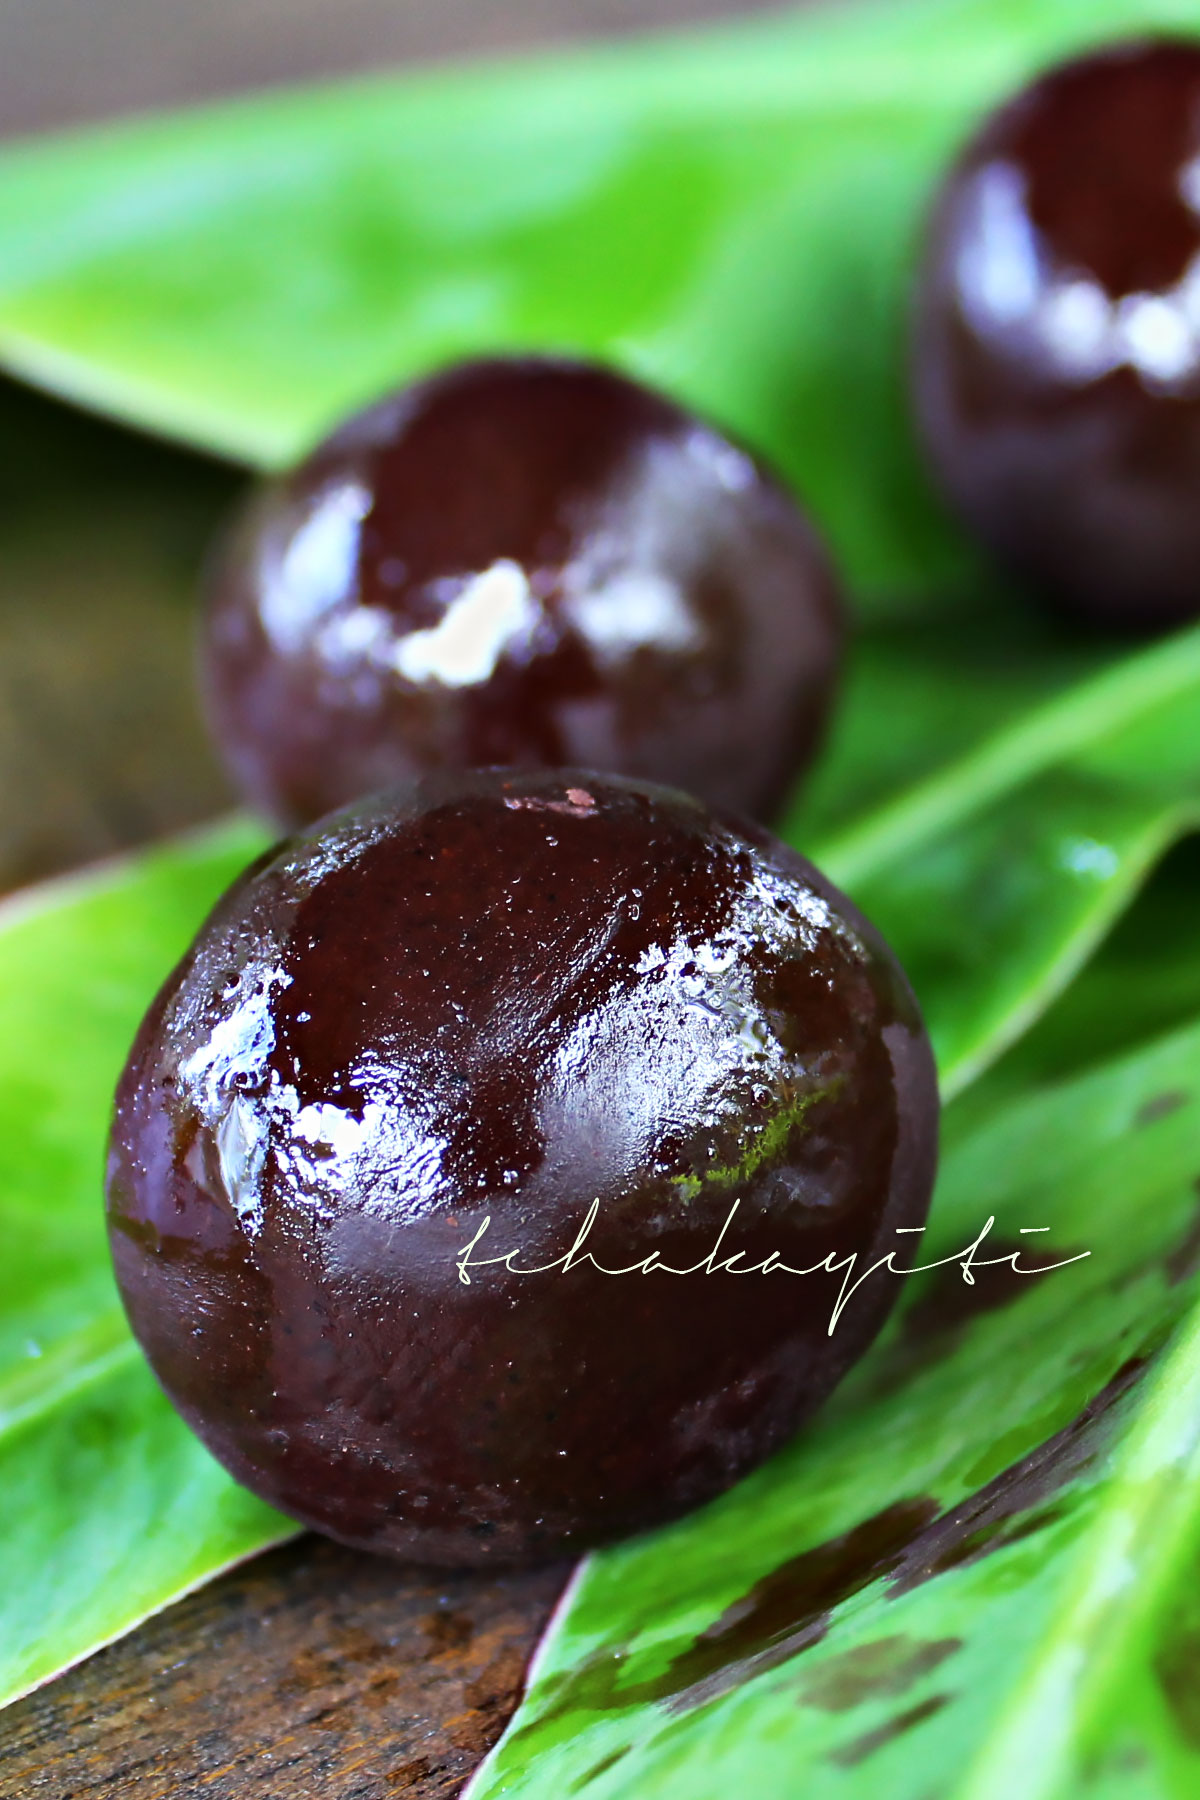 These chocolate balls are made from scratch in Haiti. Read the blog to learn how cocoa is turned into chocolate the artisan way. | tchakayiti.com